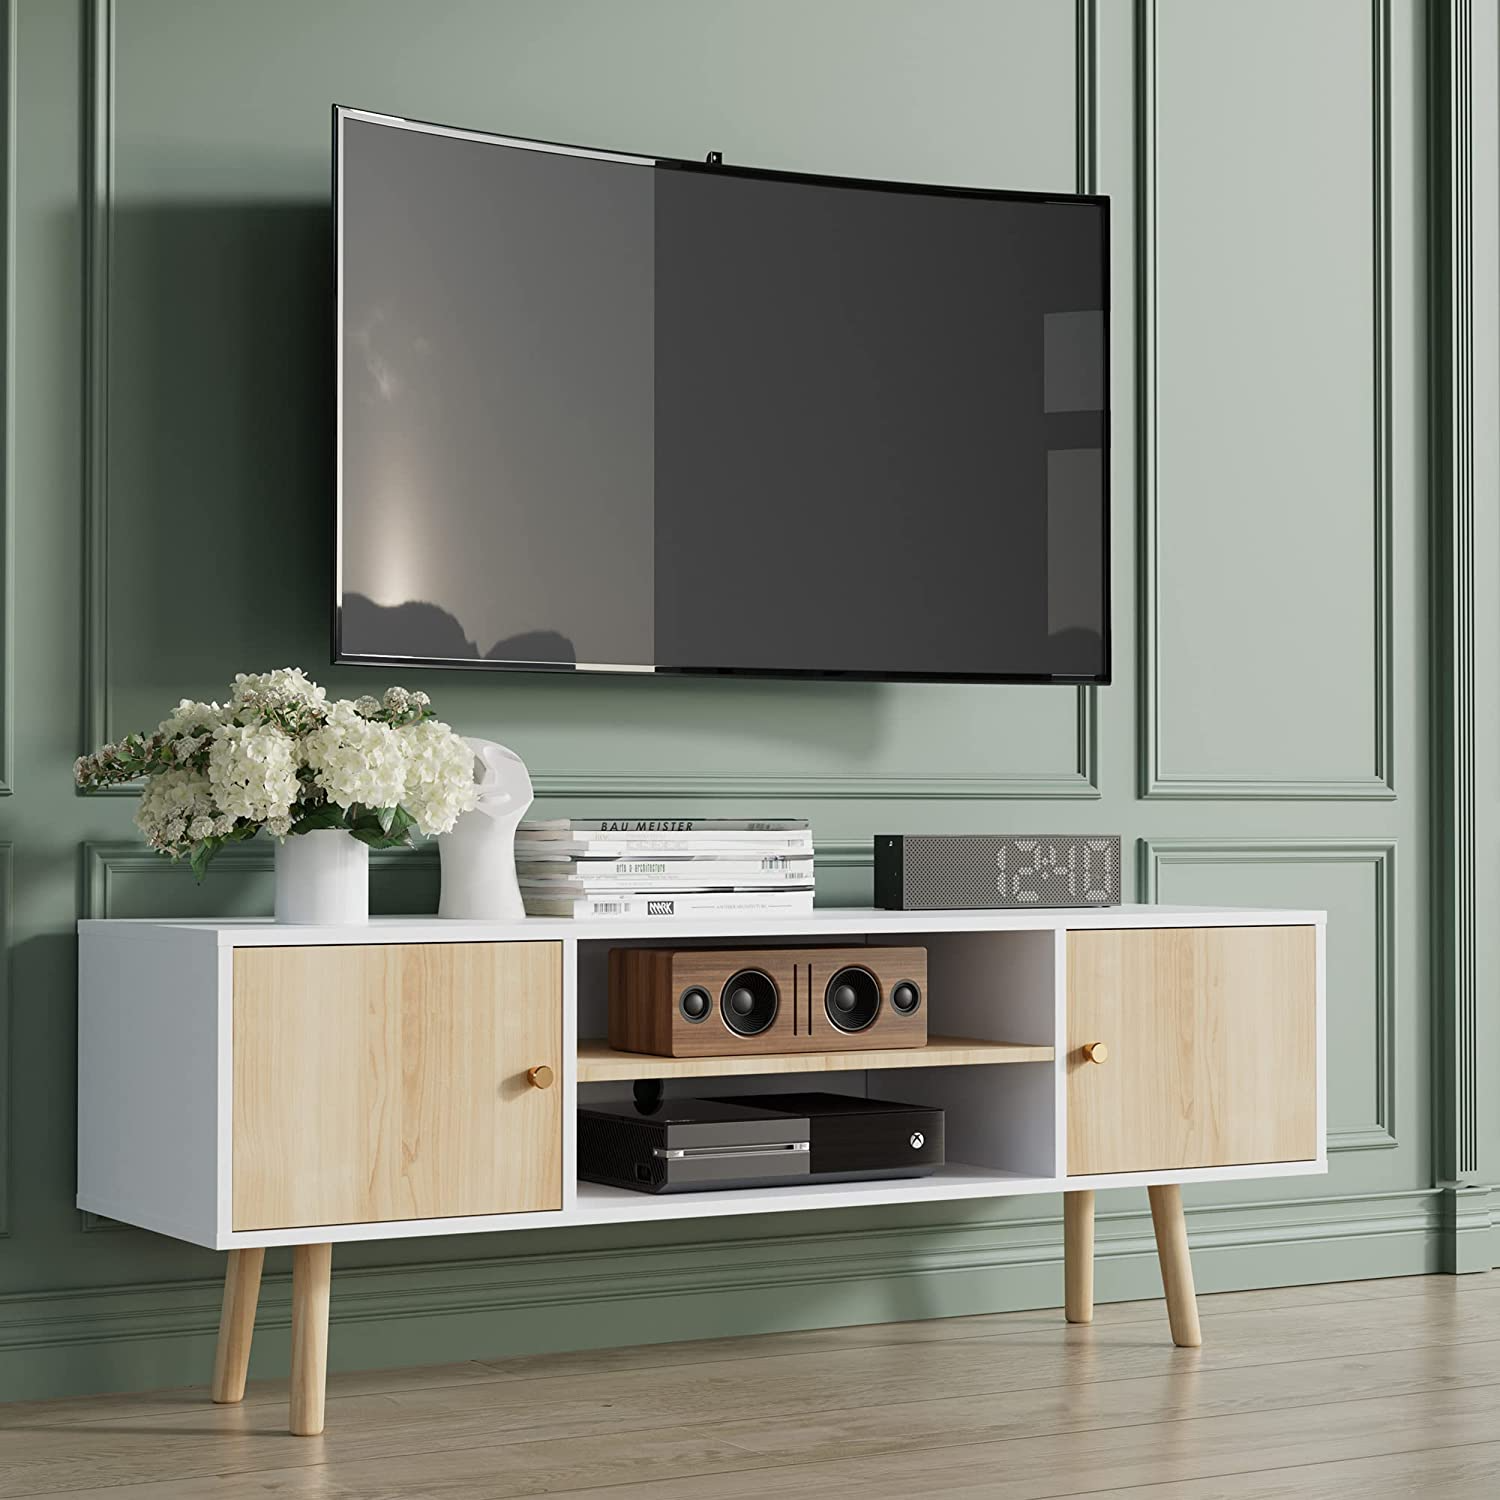 Minimalist TV Stands for Modern Living Spaces